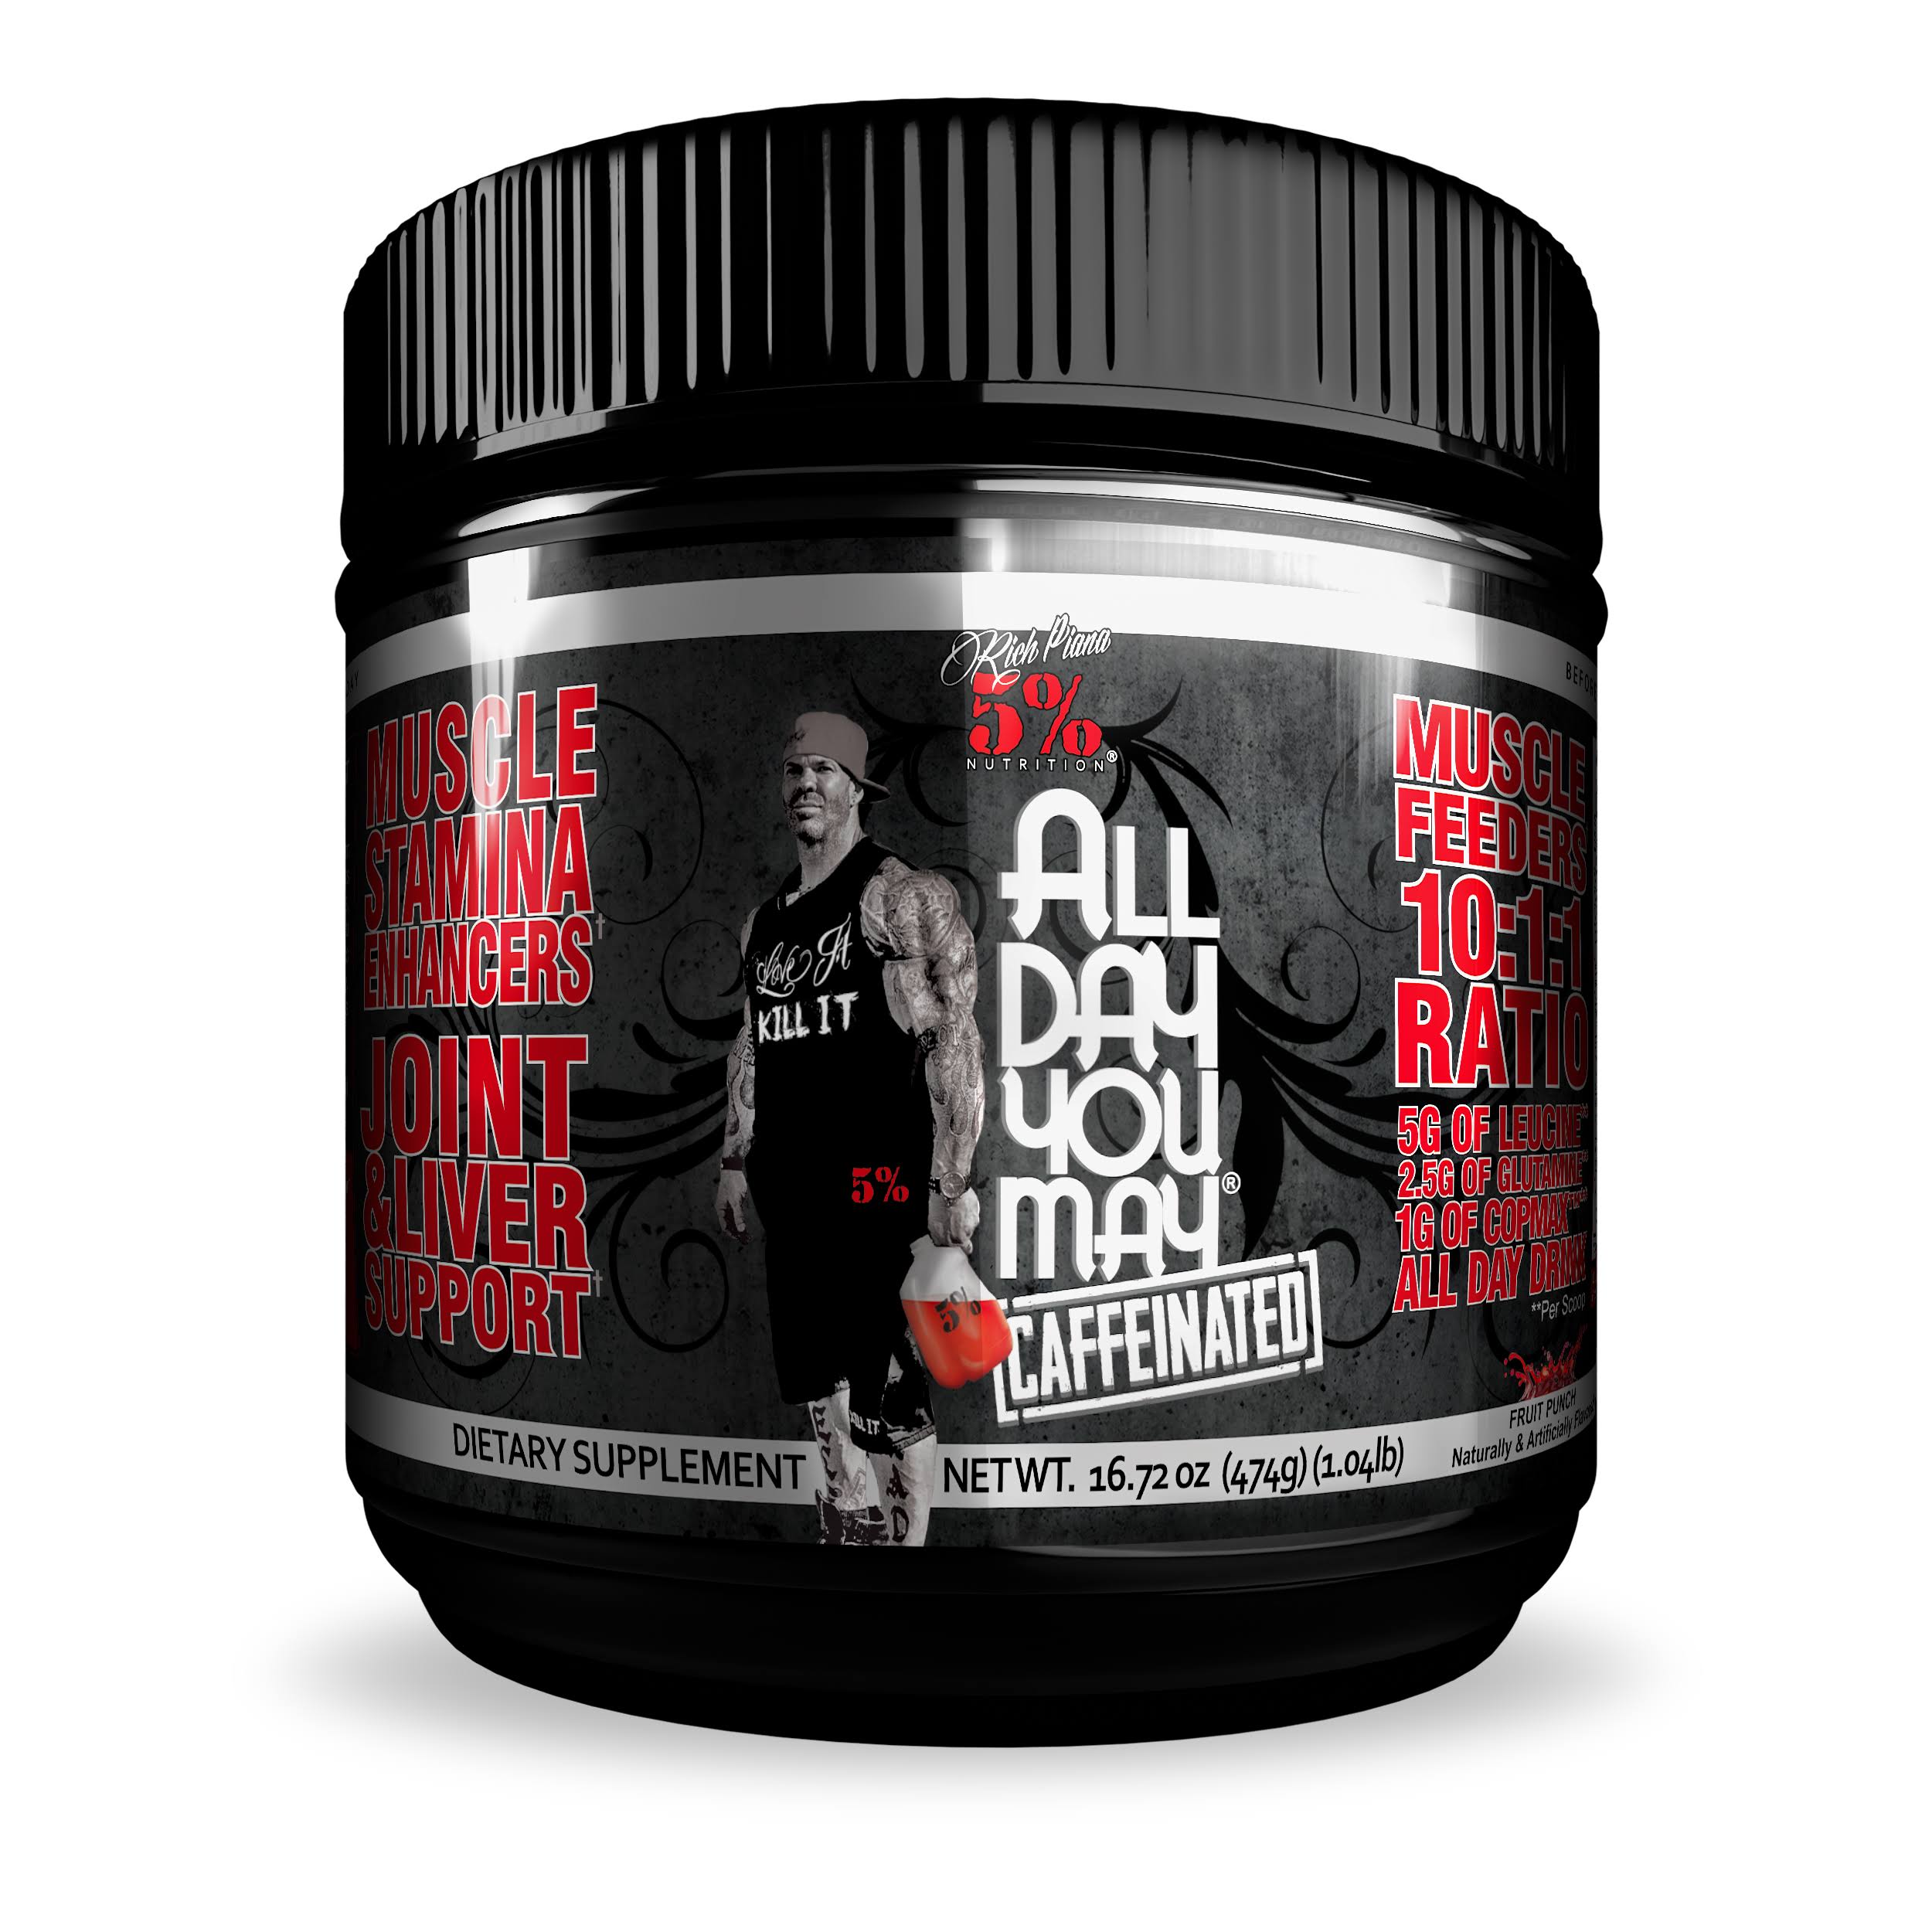 5% Nutrition All Day You May Caffeinated BCAA, Southern Sweet Tea